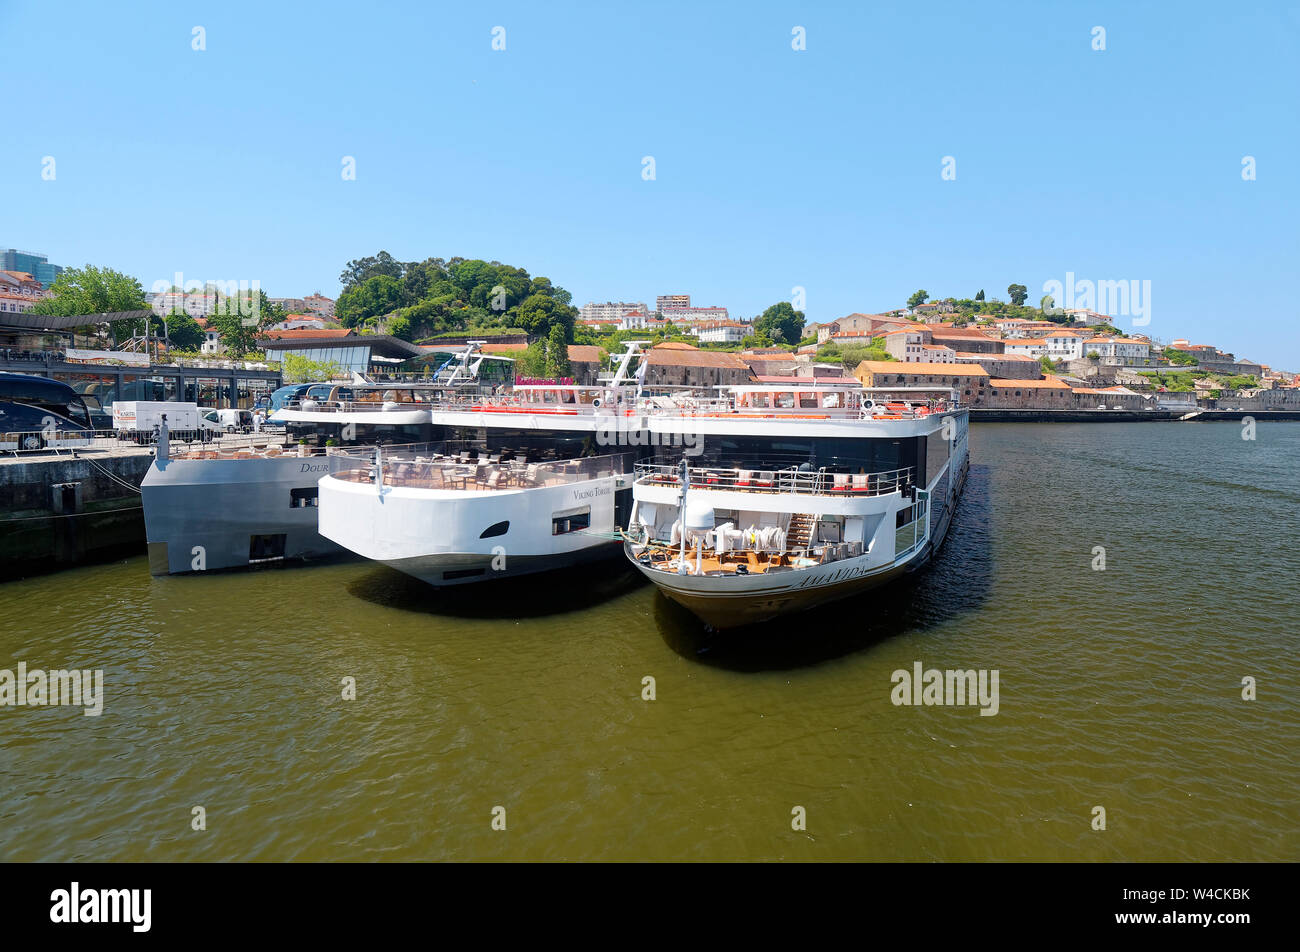 3 riverboats docked together, city, buildings, Douro River, water, scene, Europe, Porto, Portugal, spring, horizontal Stock Photo